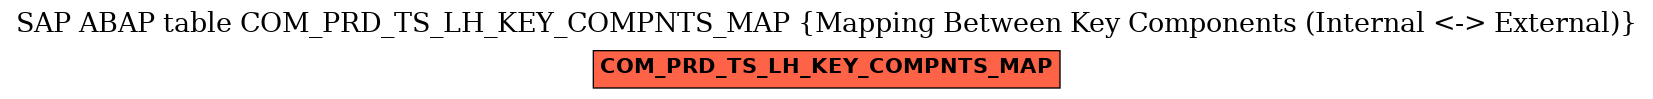 E-R Diagram for table COM_PRD_TS_LH_KEY_COMPNTS_MAP (Mapping Between Key Components (Internal <-> External))